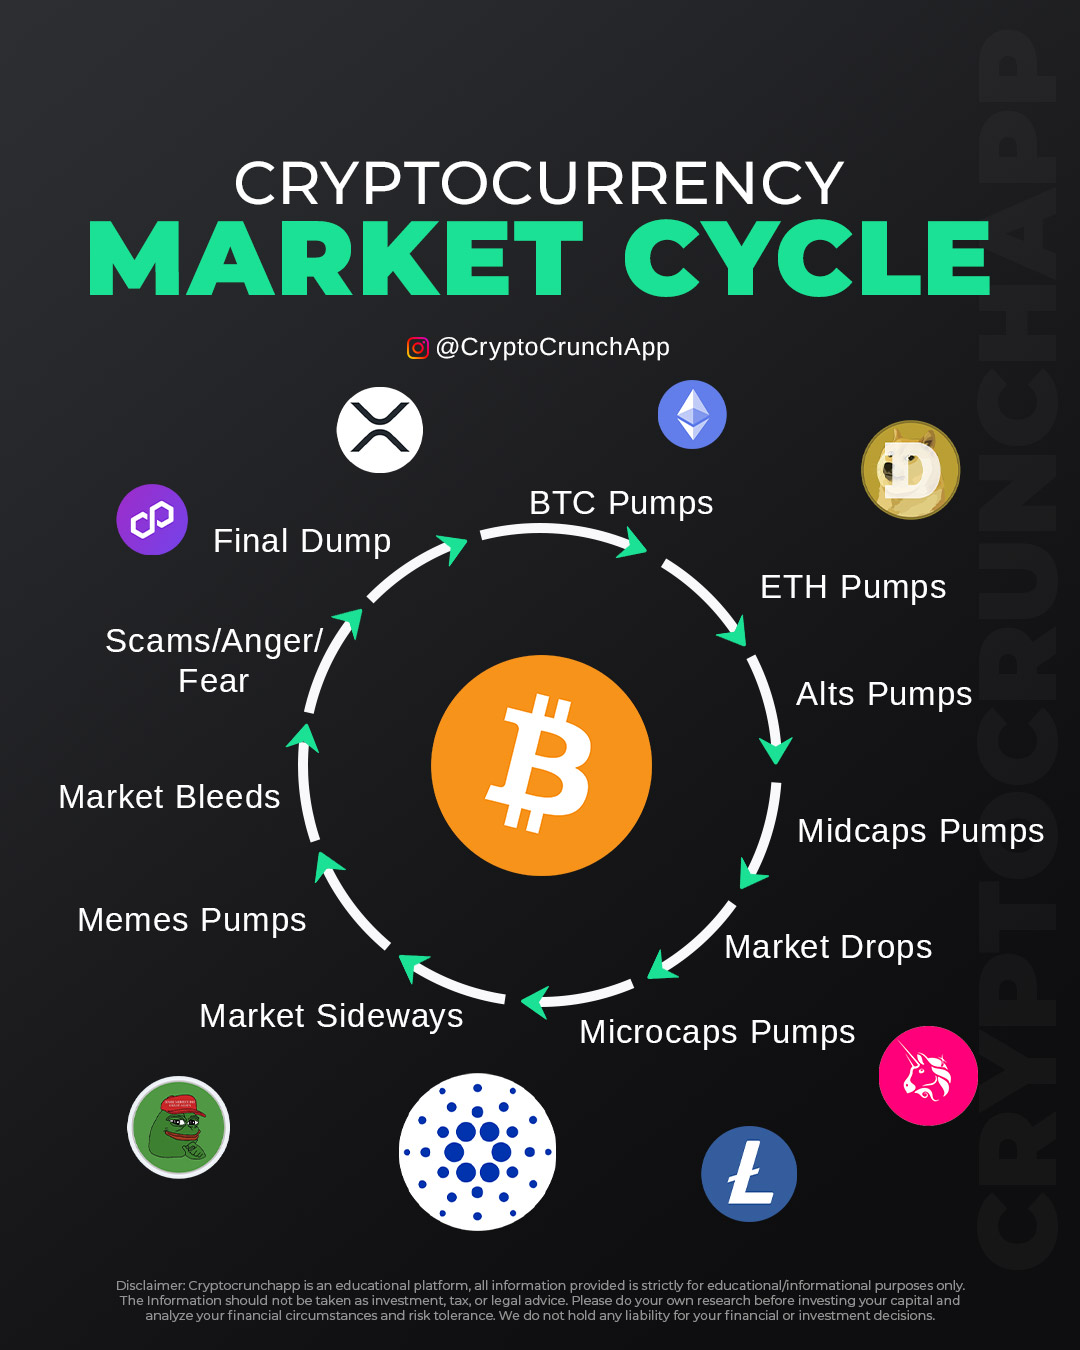 The Cryptocurrency Market Cycle: A Guide to the Rhythms of Digital Assets